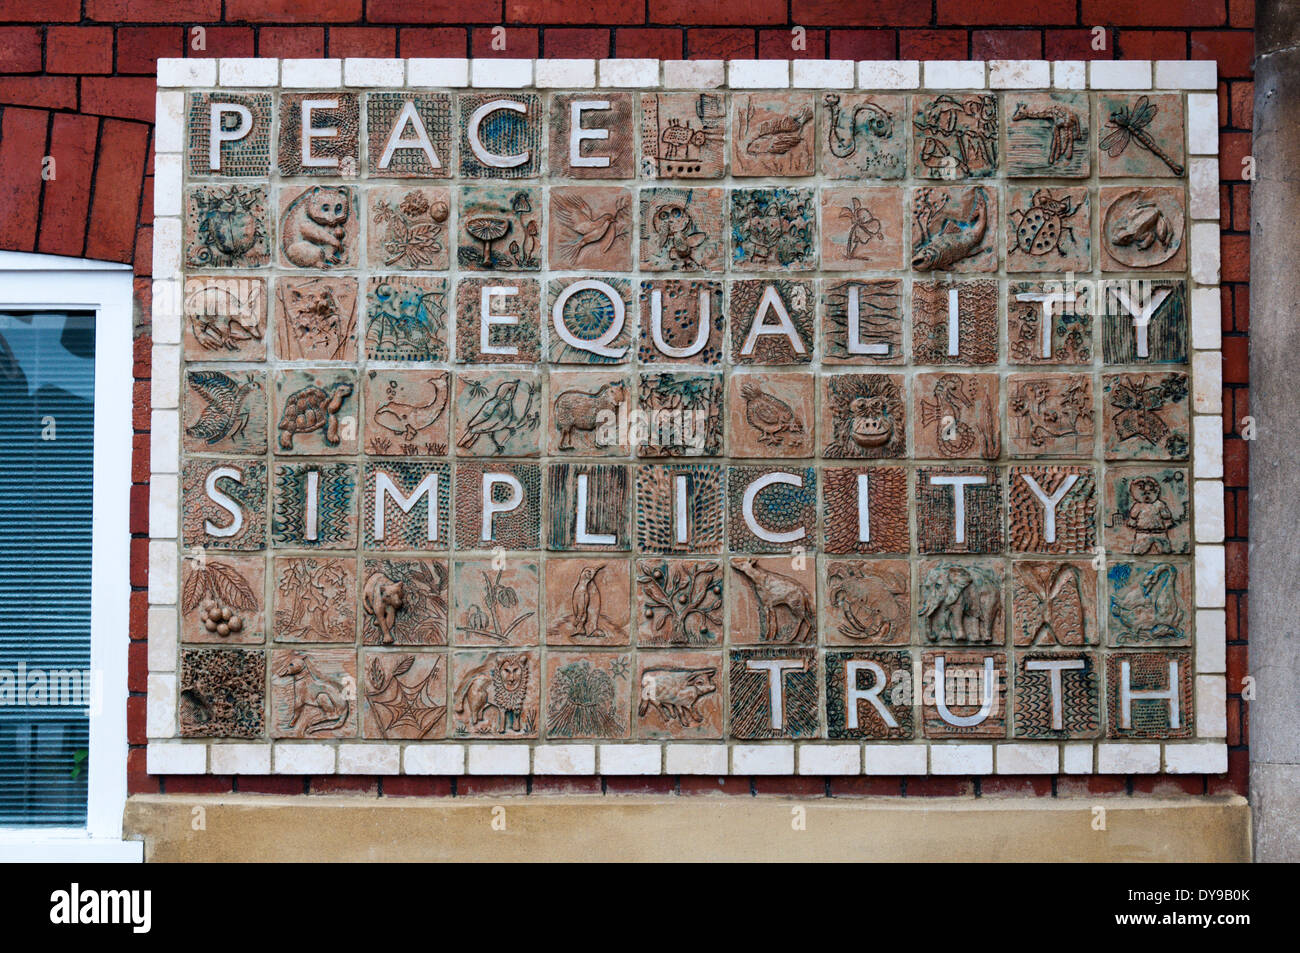 Tiles in the Horfield Quaker Meeting House Peace Garden in Bristol contain the Quaker principles. Stock Photo